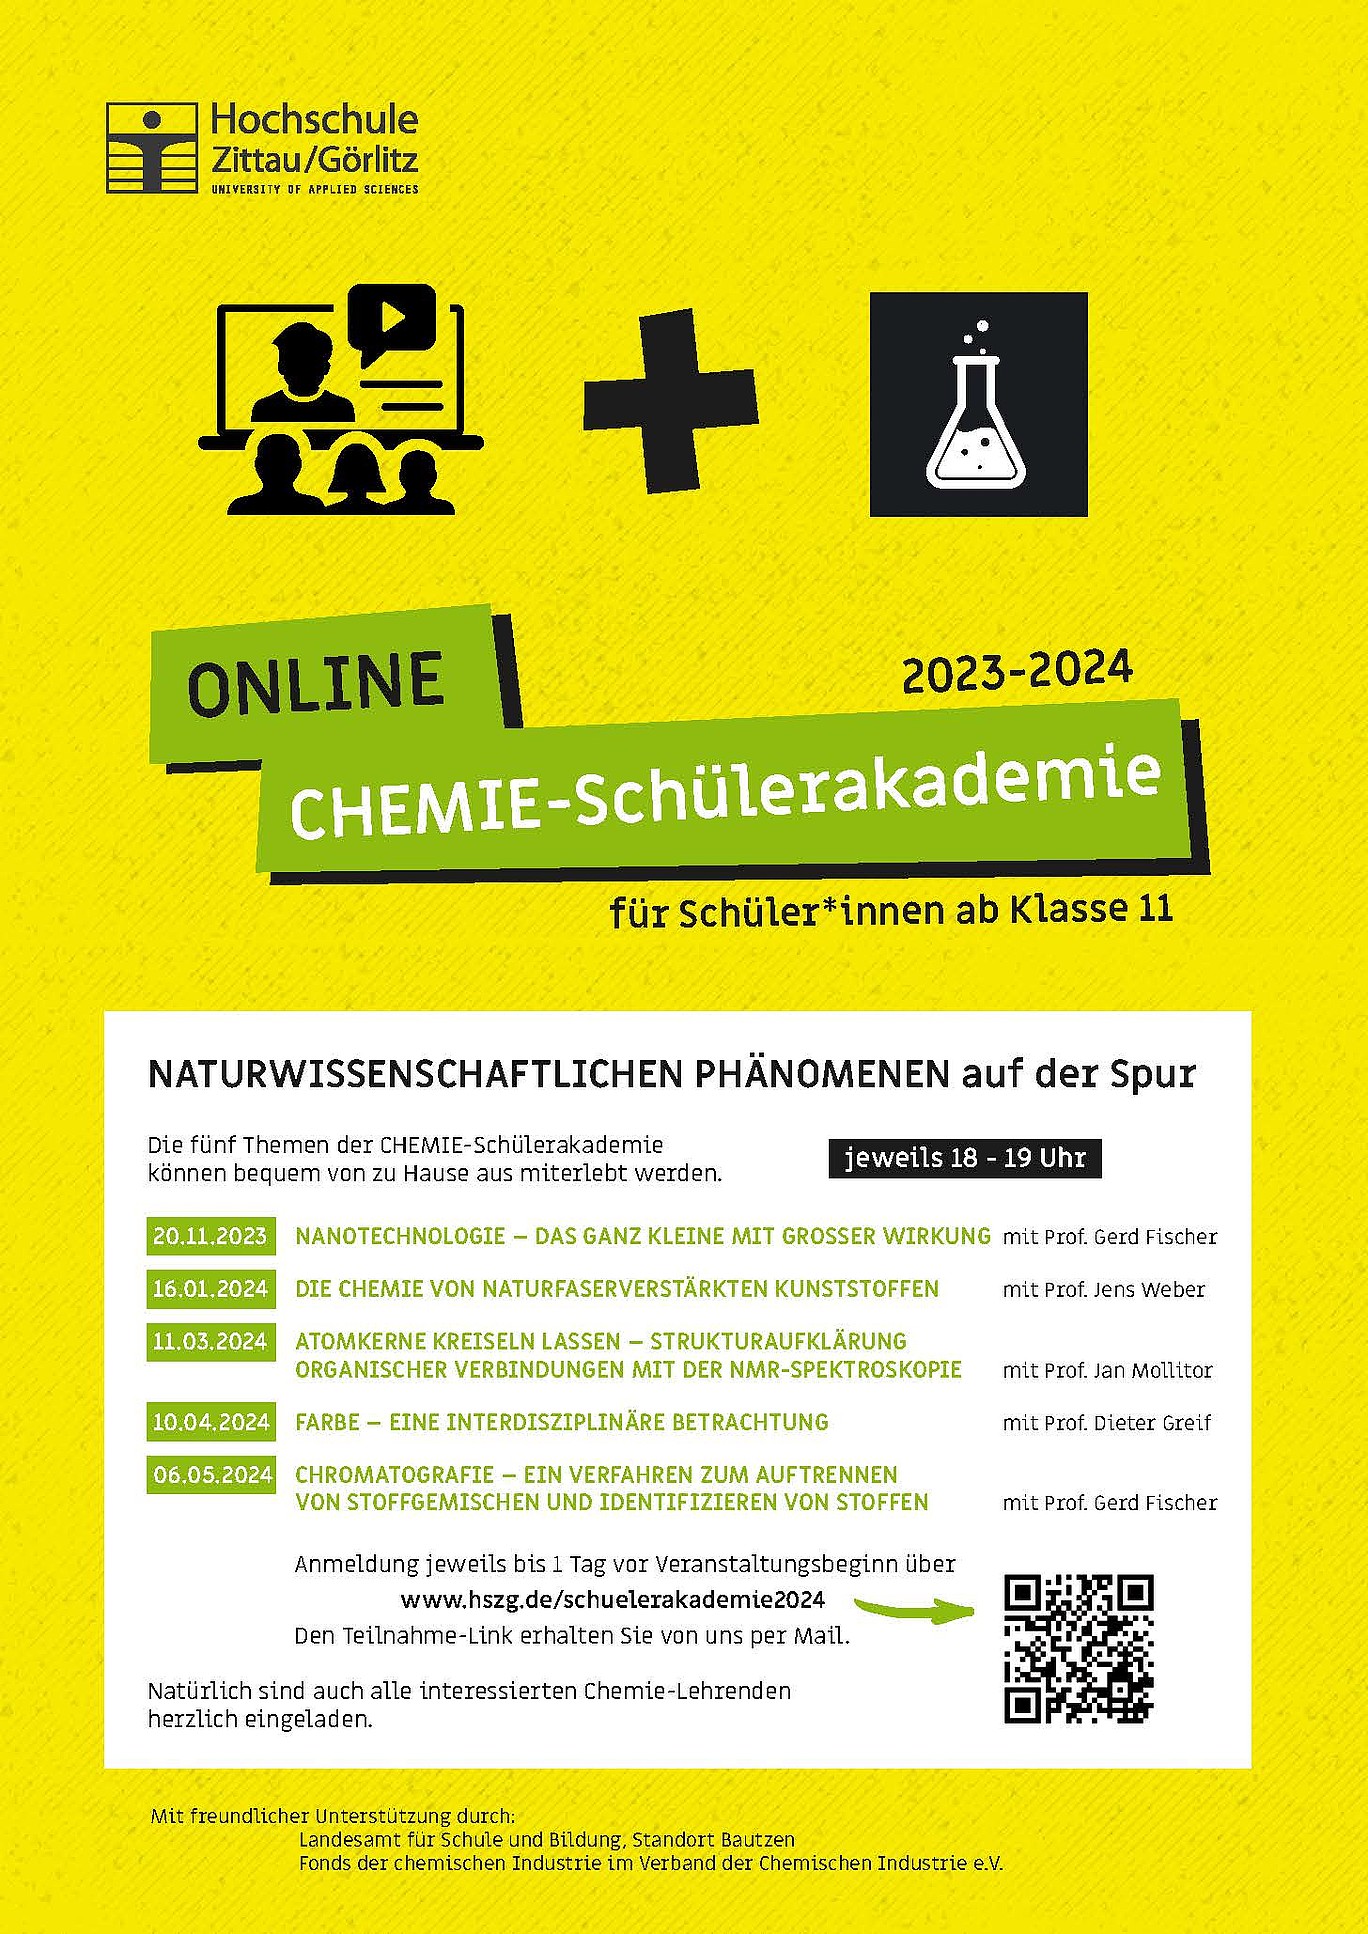 Poster of the Chemistry Student Academy 2024